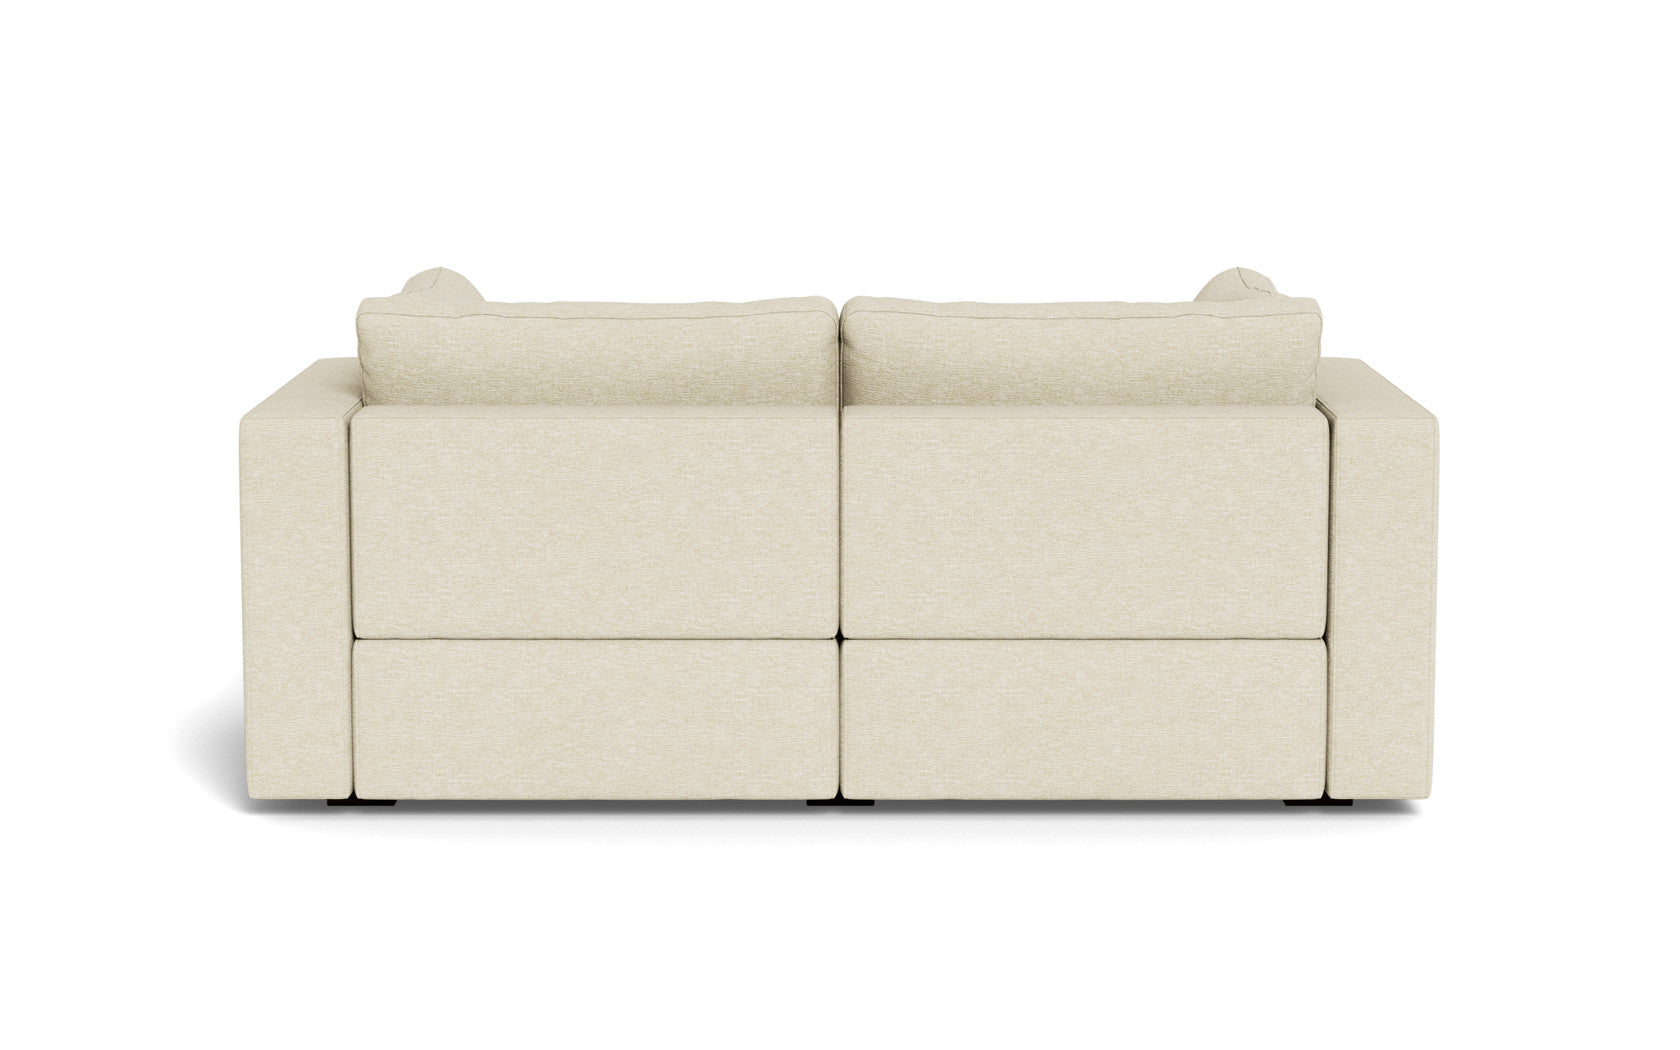 The Pelican Node Sofa: A Sofa with Unmatched Modular Comfort